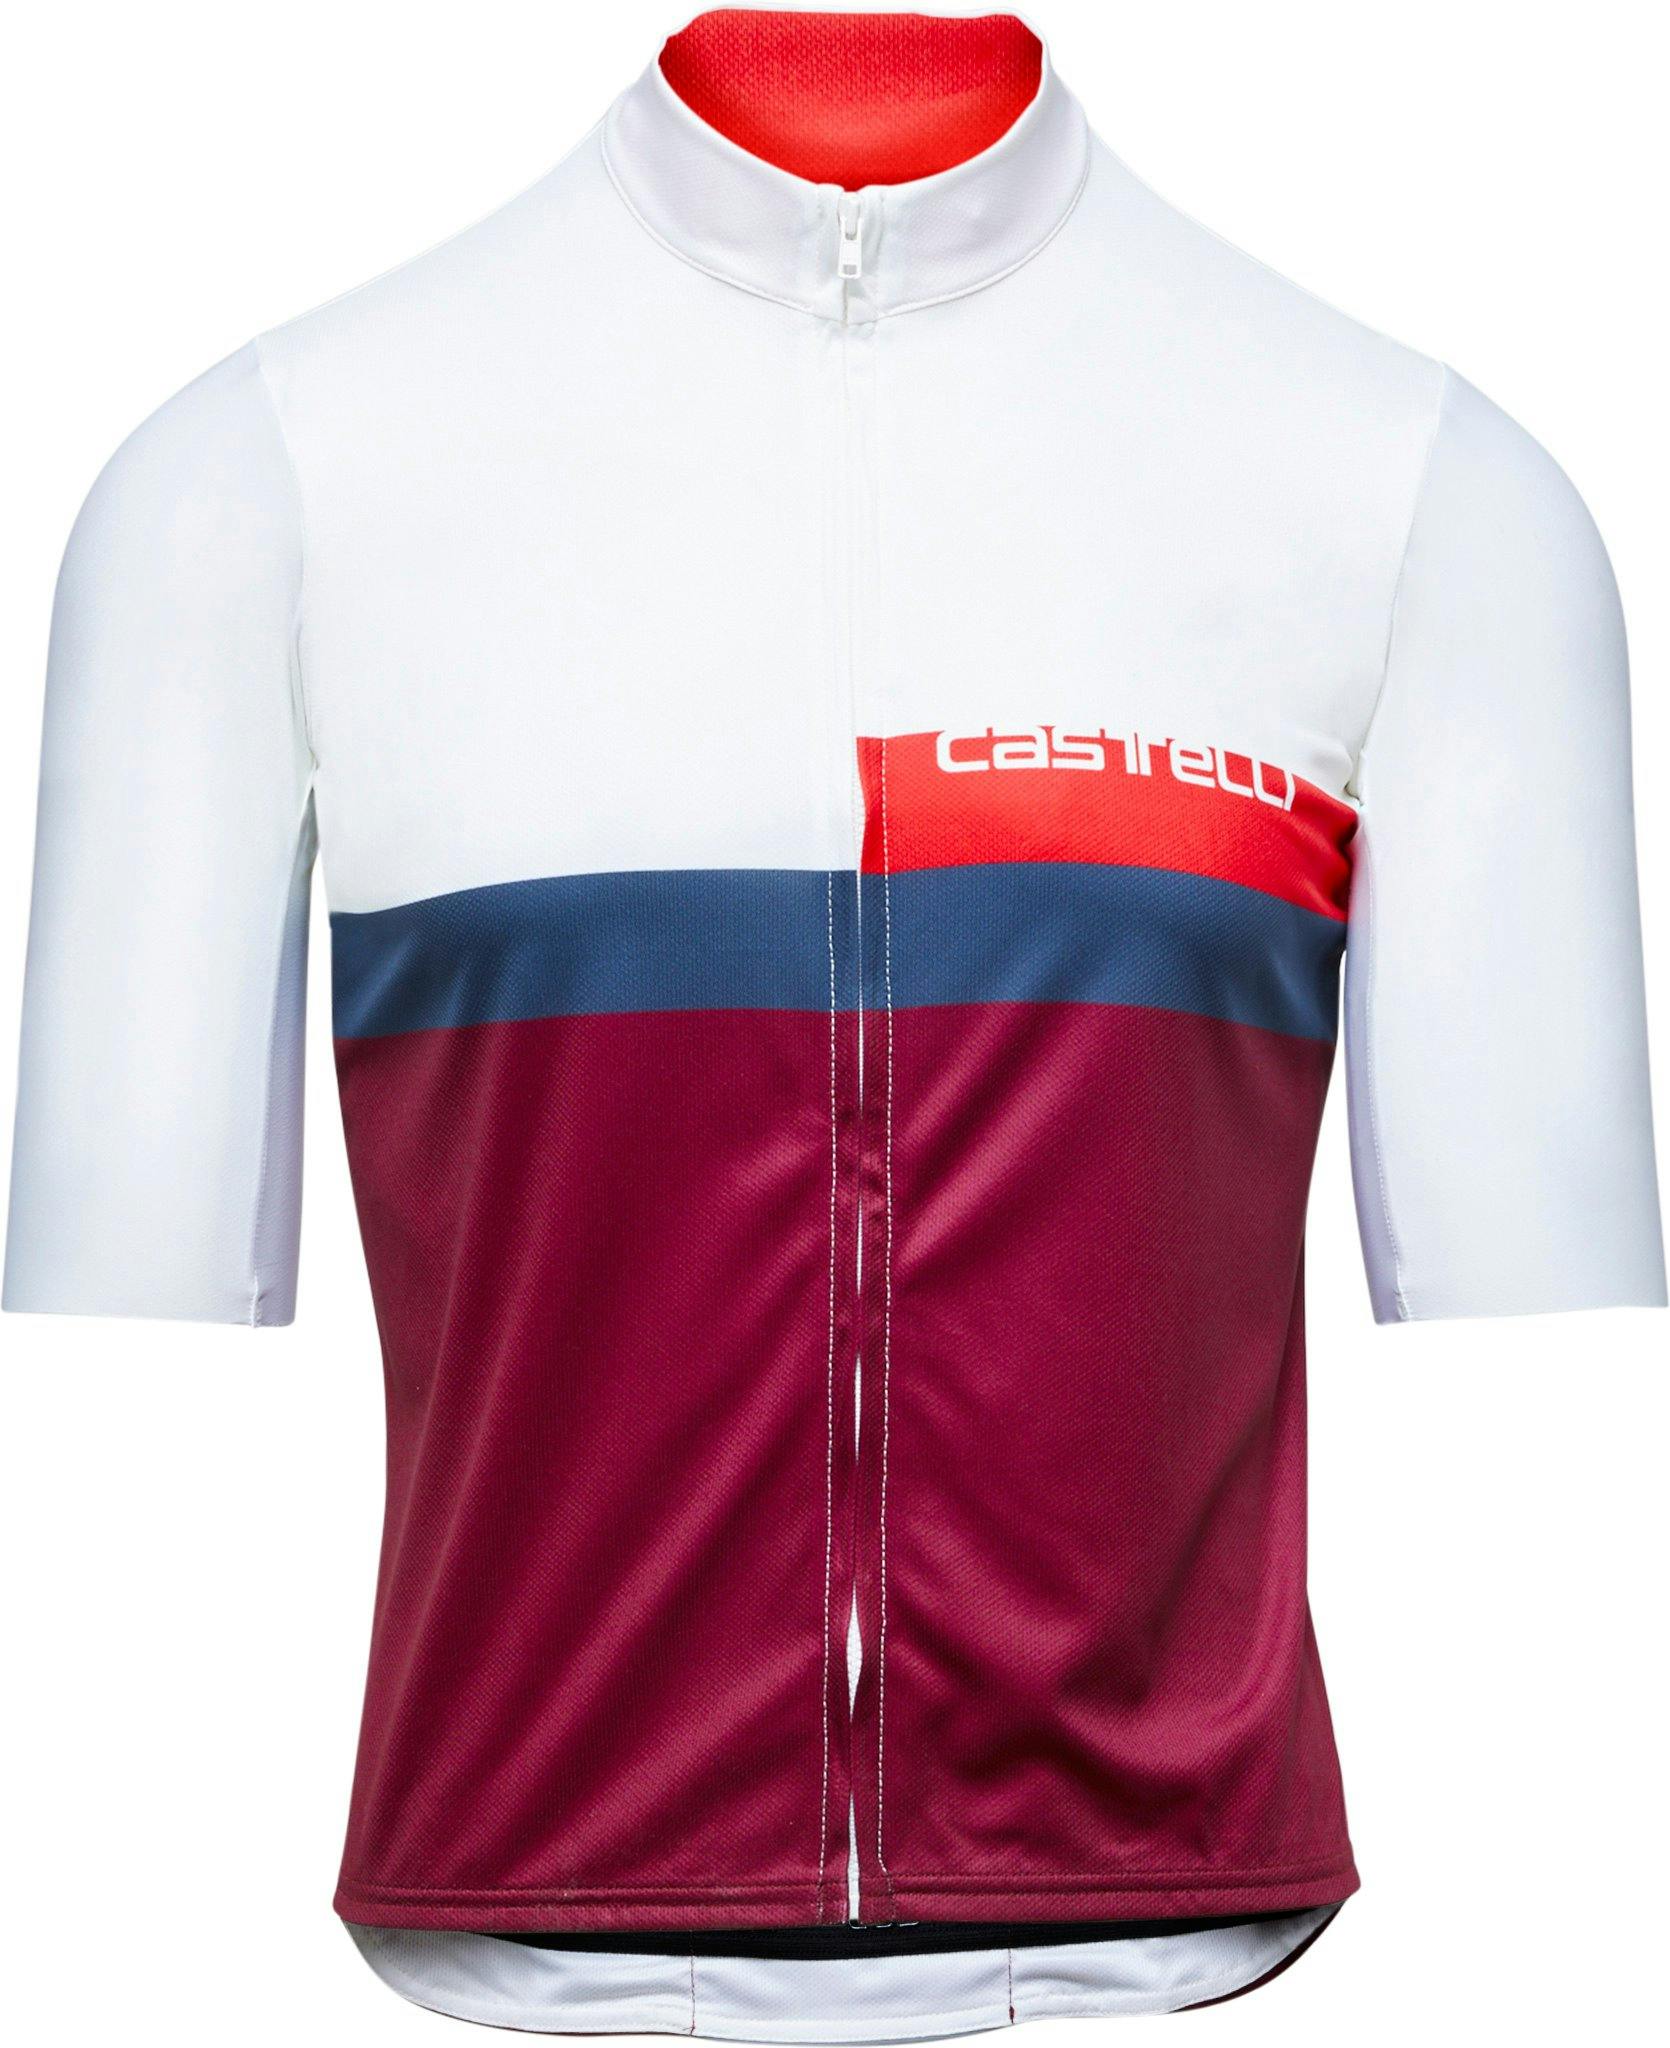 Product image for A Blocco Jersey - Men's